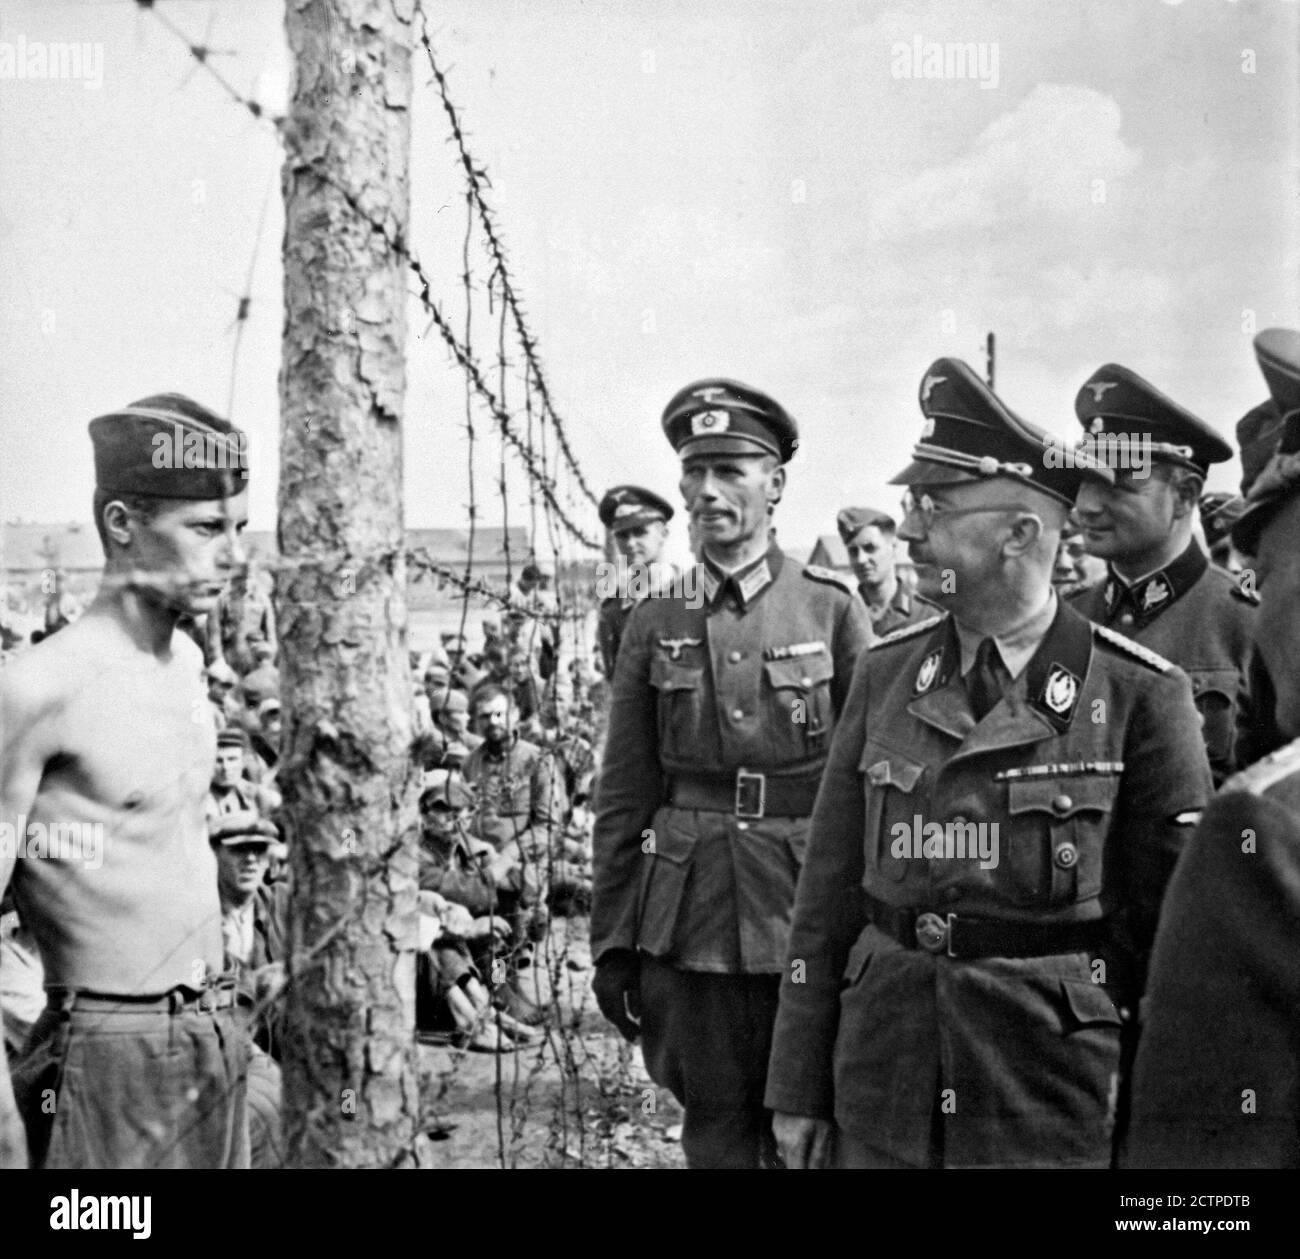 Prisoner of war camp officers Black and White Stock Photos & Images - Alamy